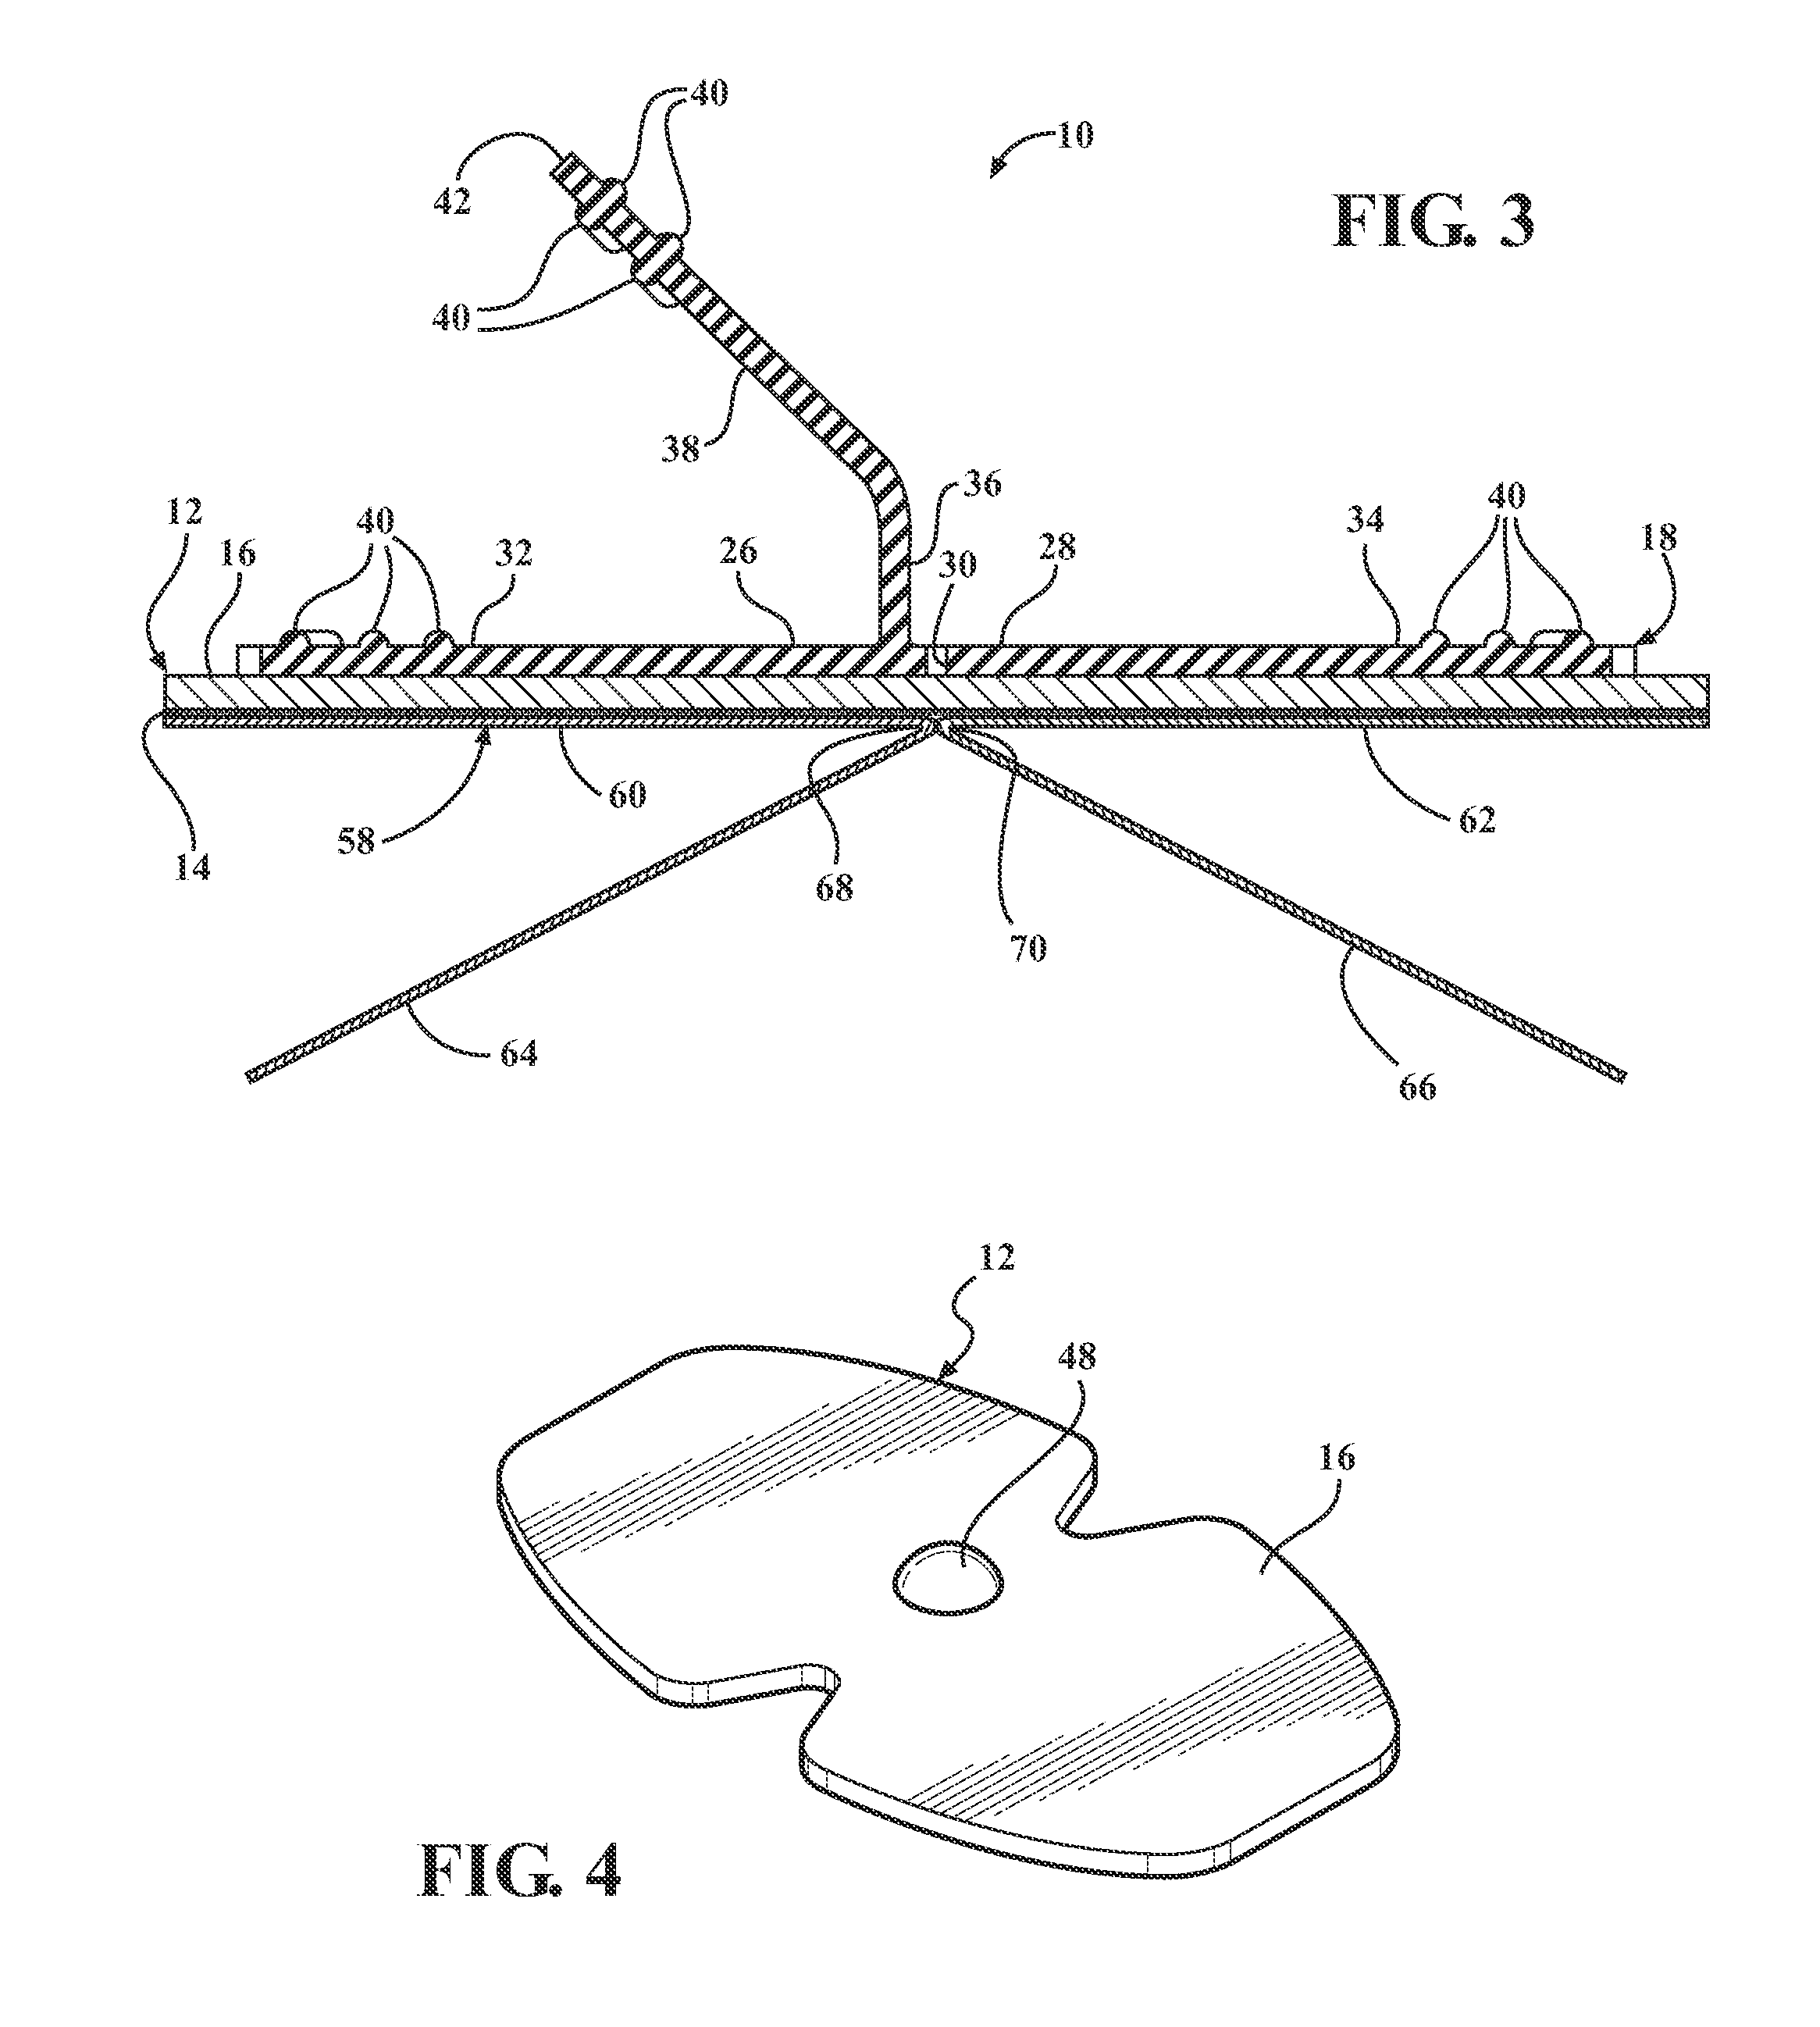 Specialized catheter securement devices for peripherally inserted central catheters